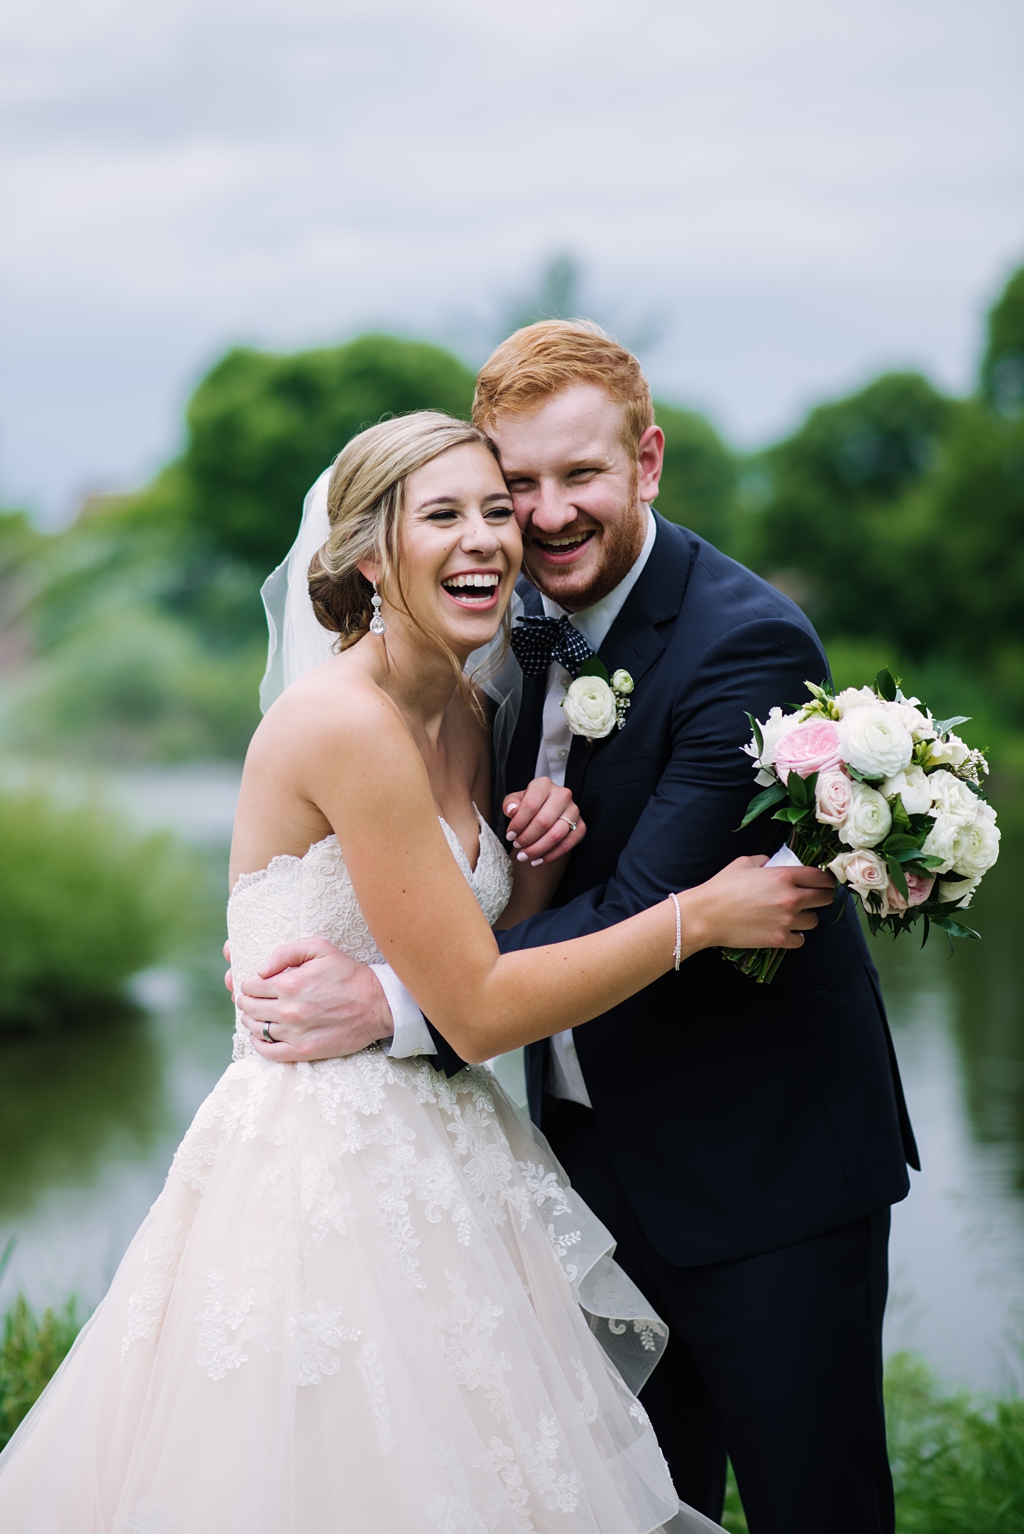 newlyweds laughing together during portraits